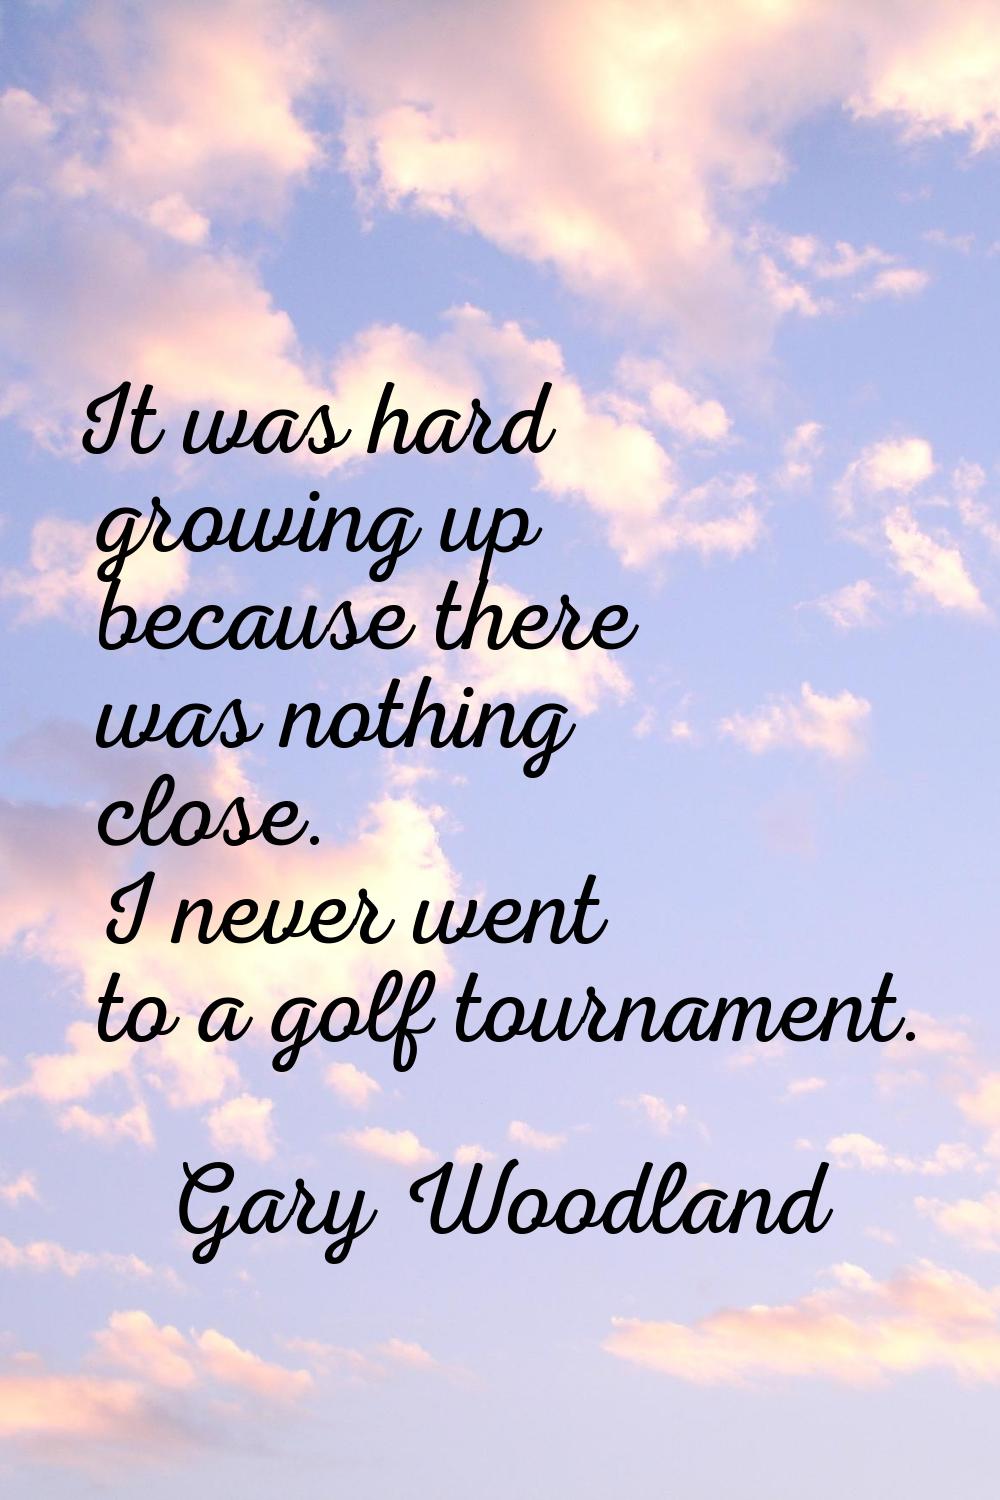 It was hard growing up because there was nothing close. I never went to a golf tournament.